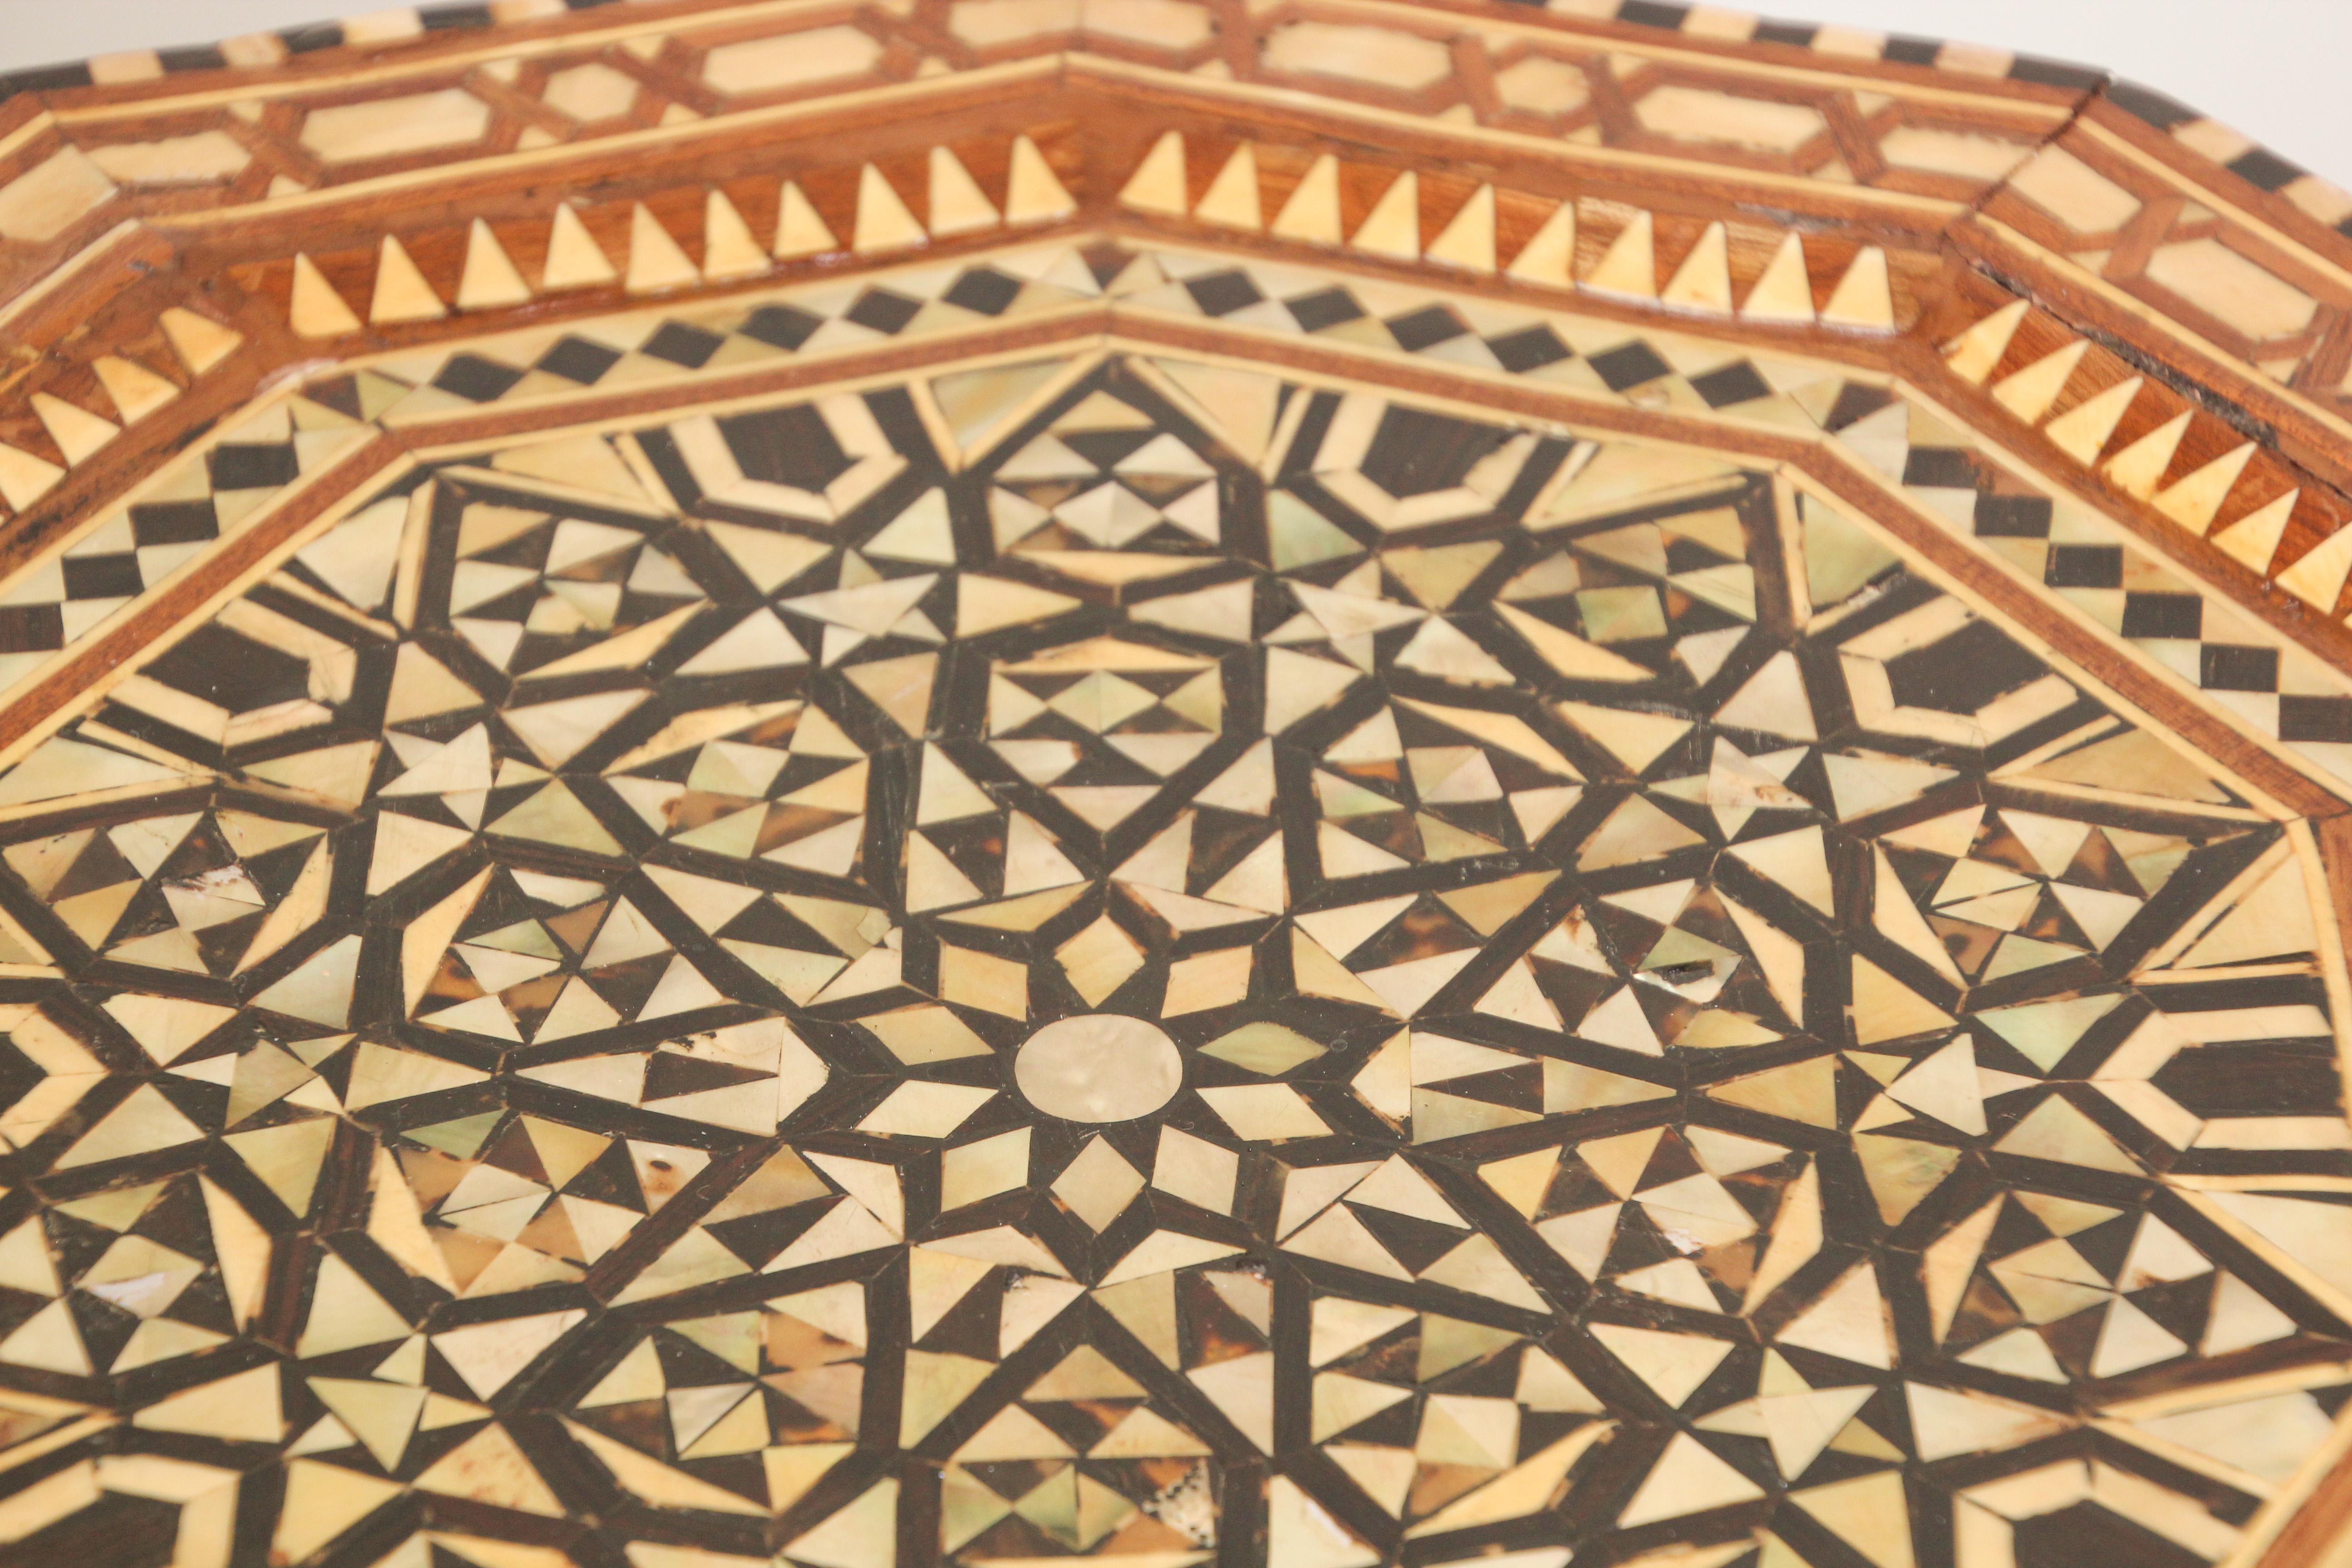 Syrian Octagonal tables Inlaid with Mother-of-Pearl 11